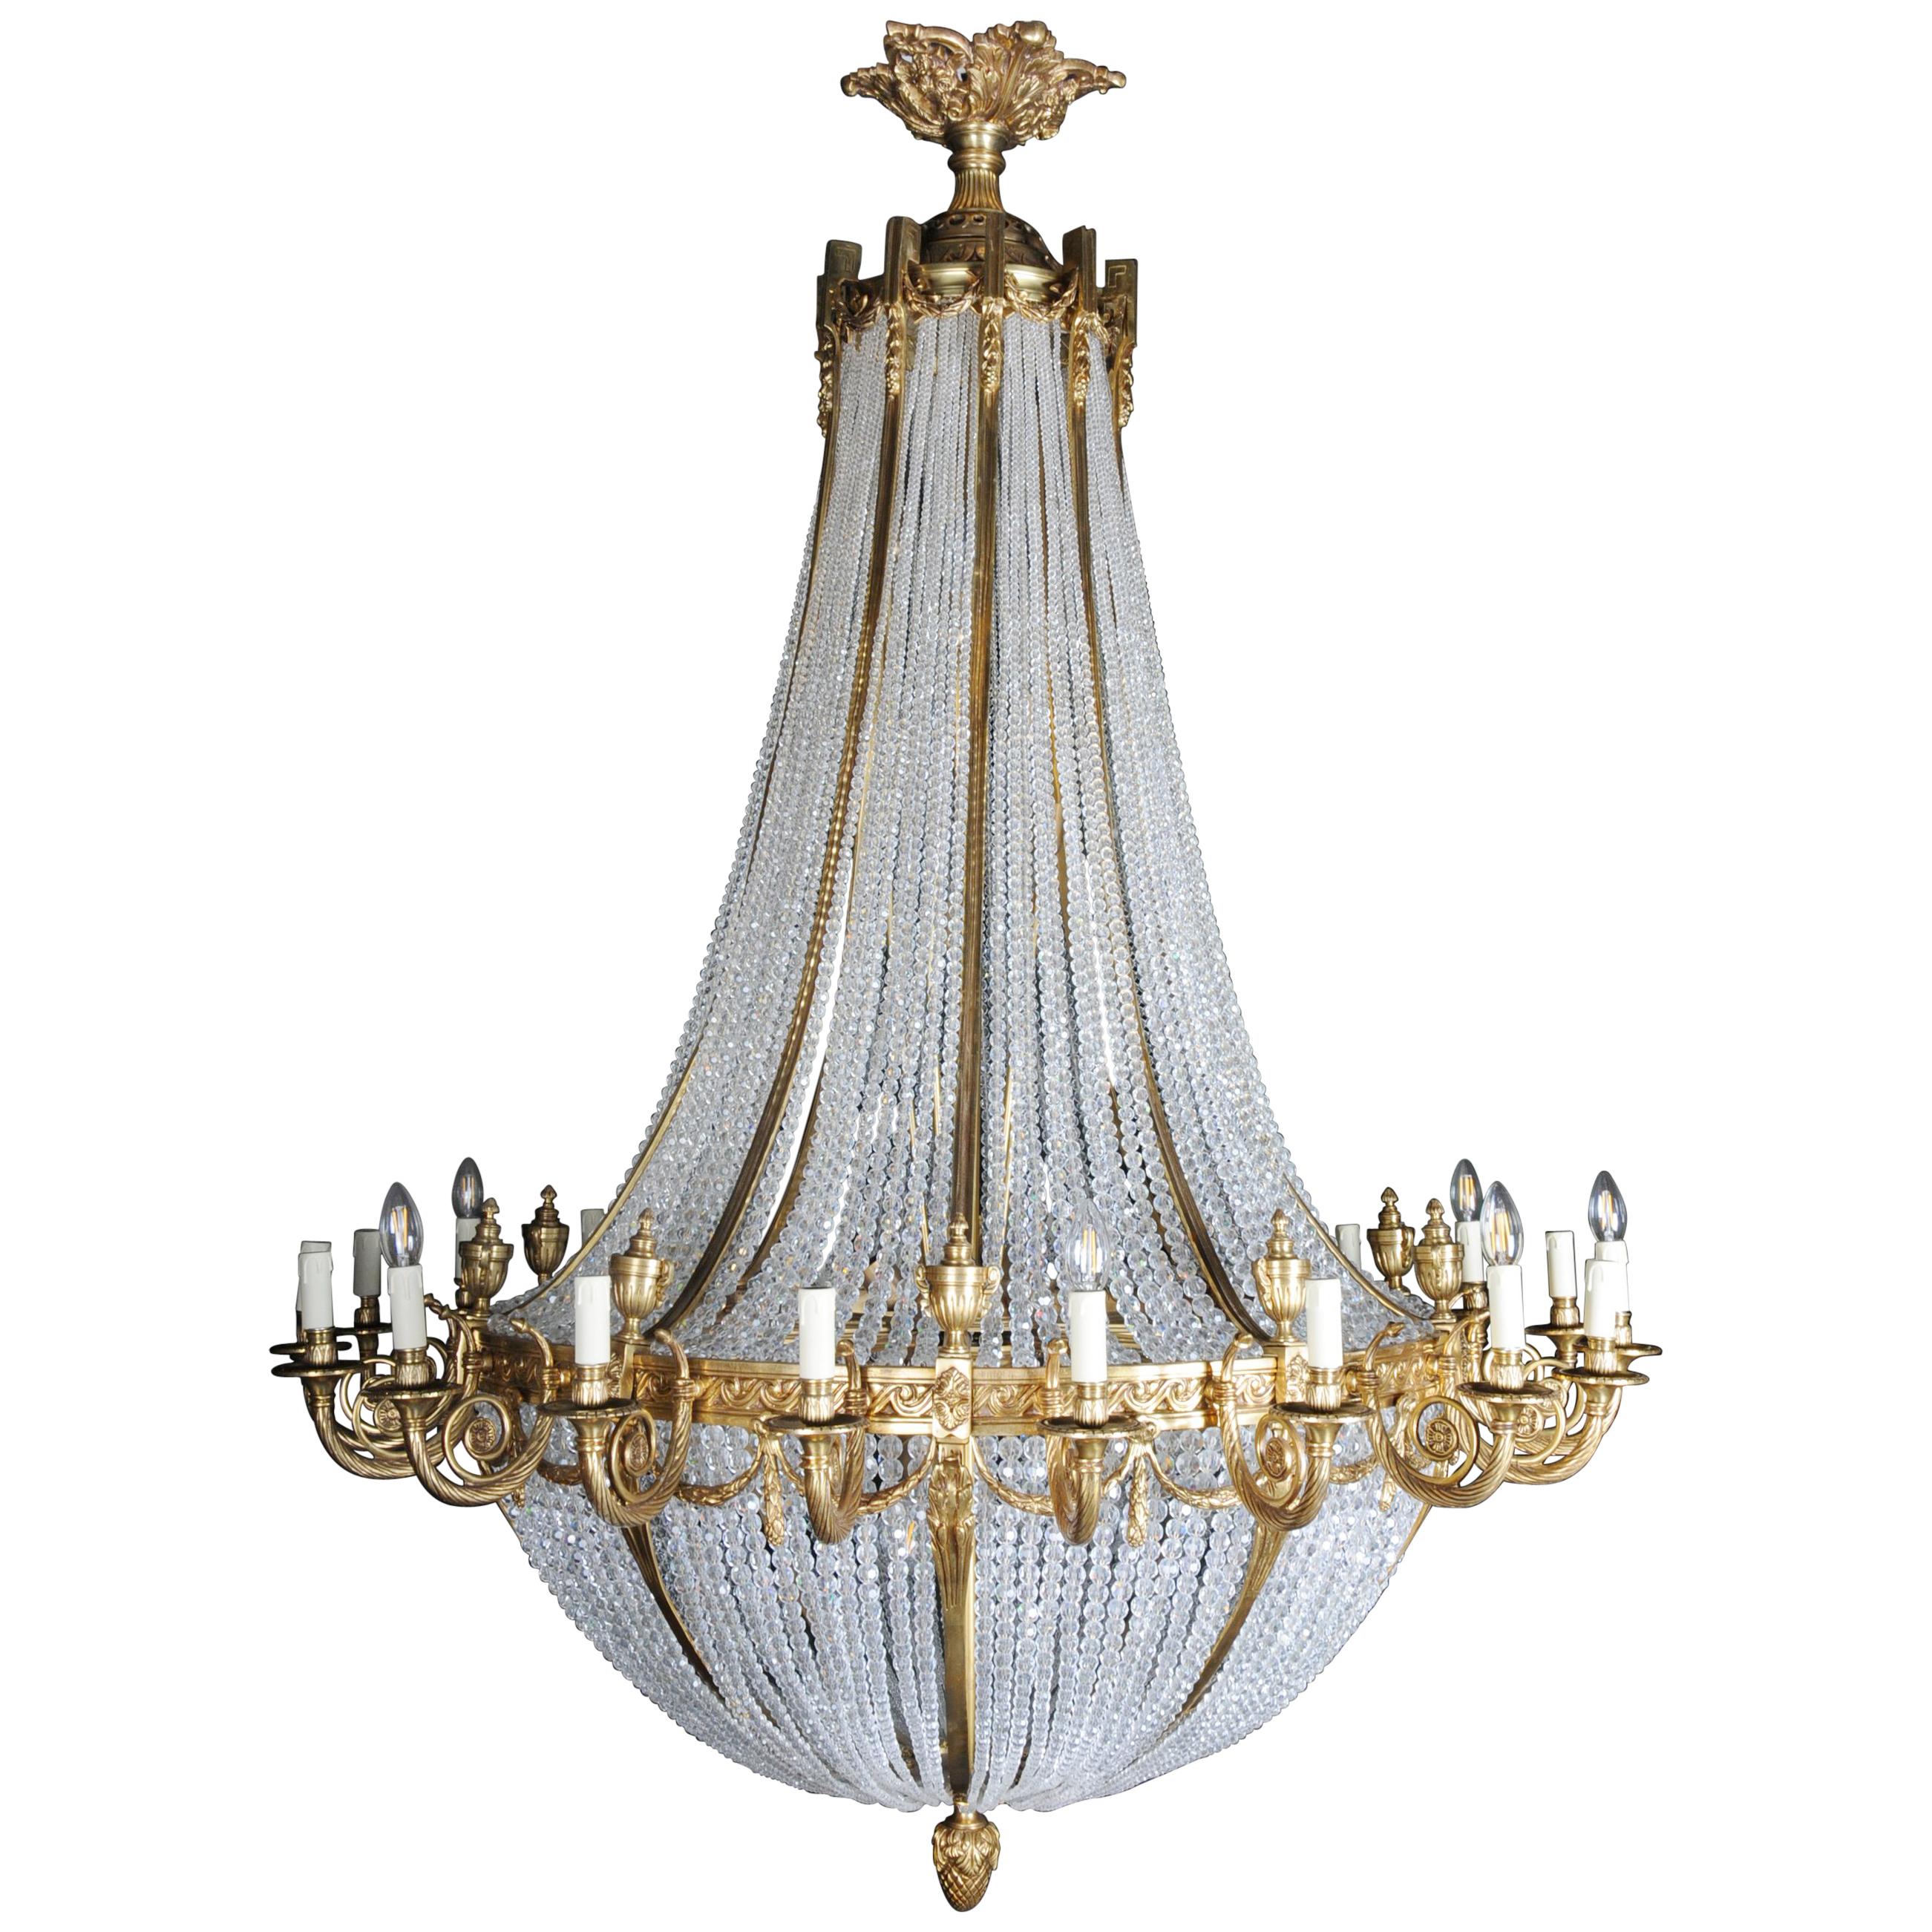 Monumental, noble ceiling chandelier in the Louis-Seize style For Sale